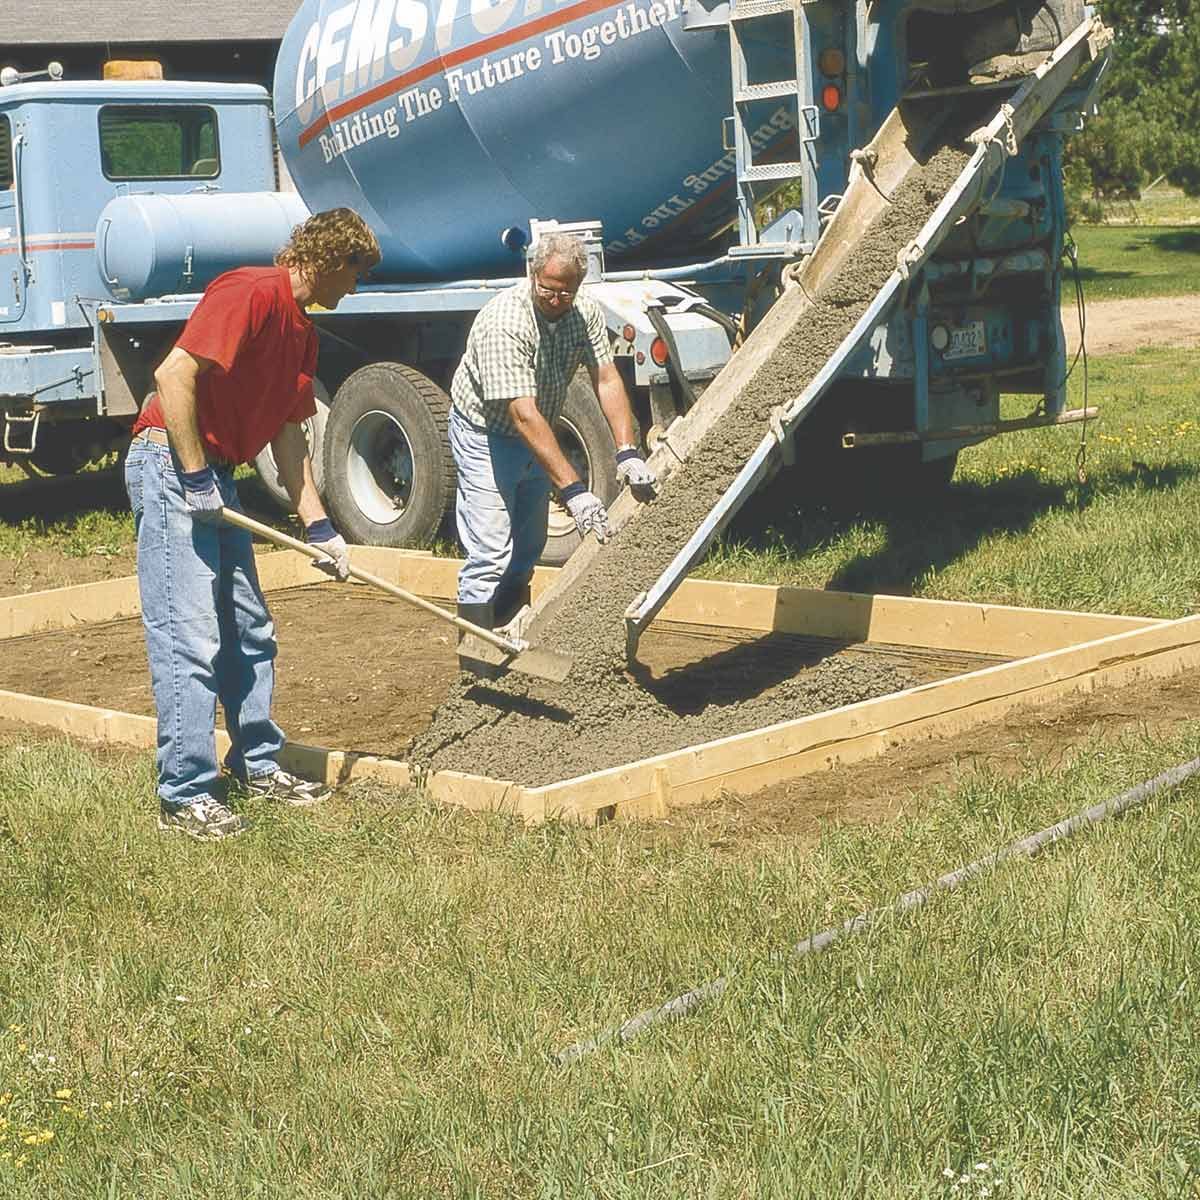 drier concrete mix is better, shed foundation